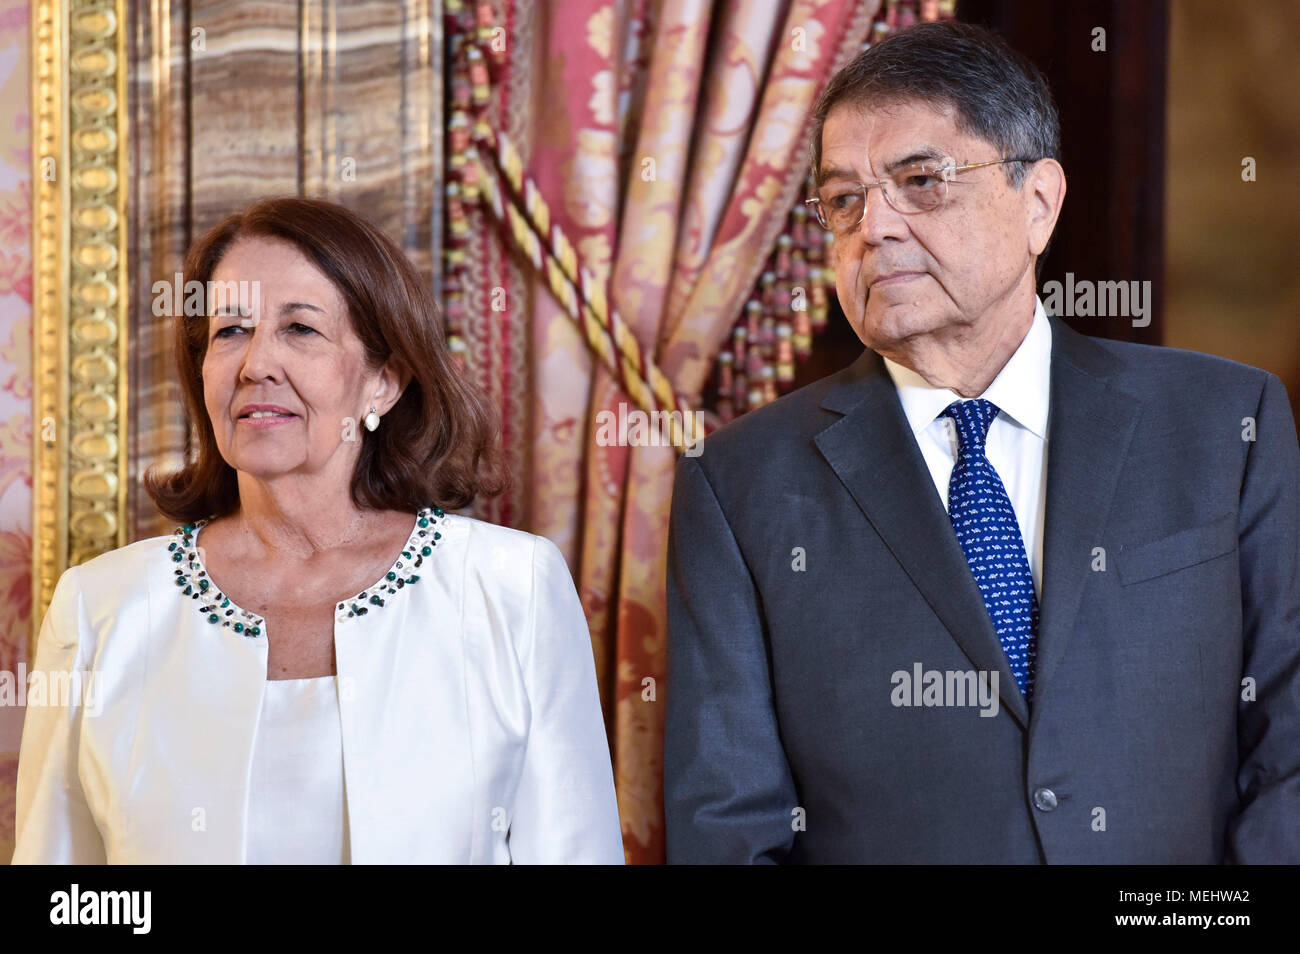 Sergio Ramirez with wife Gertrudis Guerrero Mayorga at the reception for the official lunch on the occasion of the presentation of the Spanish literary prize Premio Miguel de Cervantes at the Palacio Real. Madrid, 20.04.2018 | usage worldwide Stock Photo